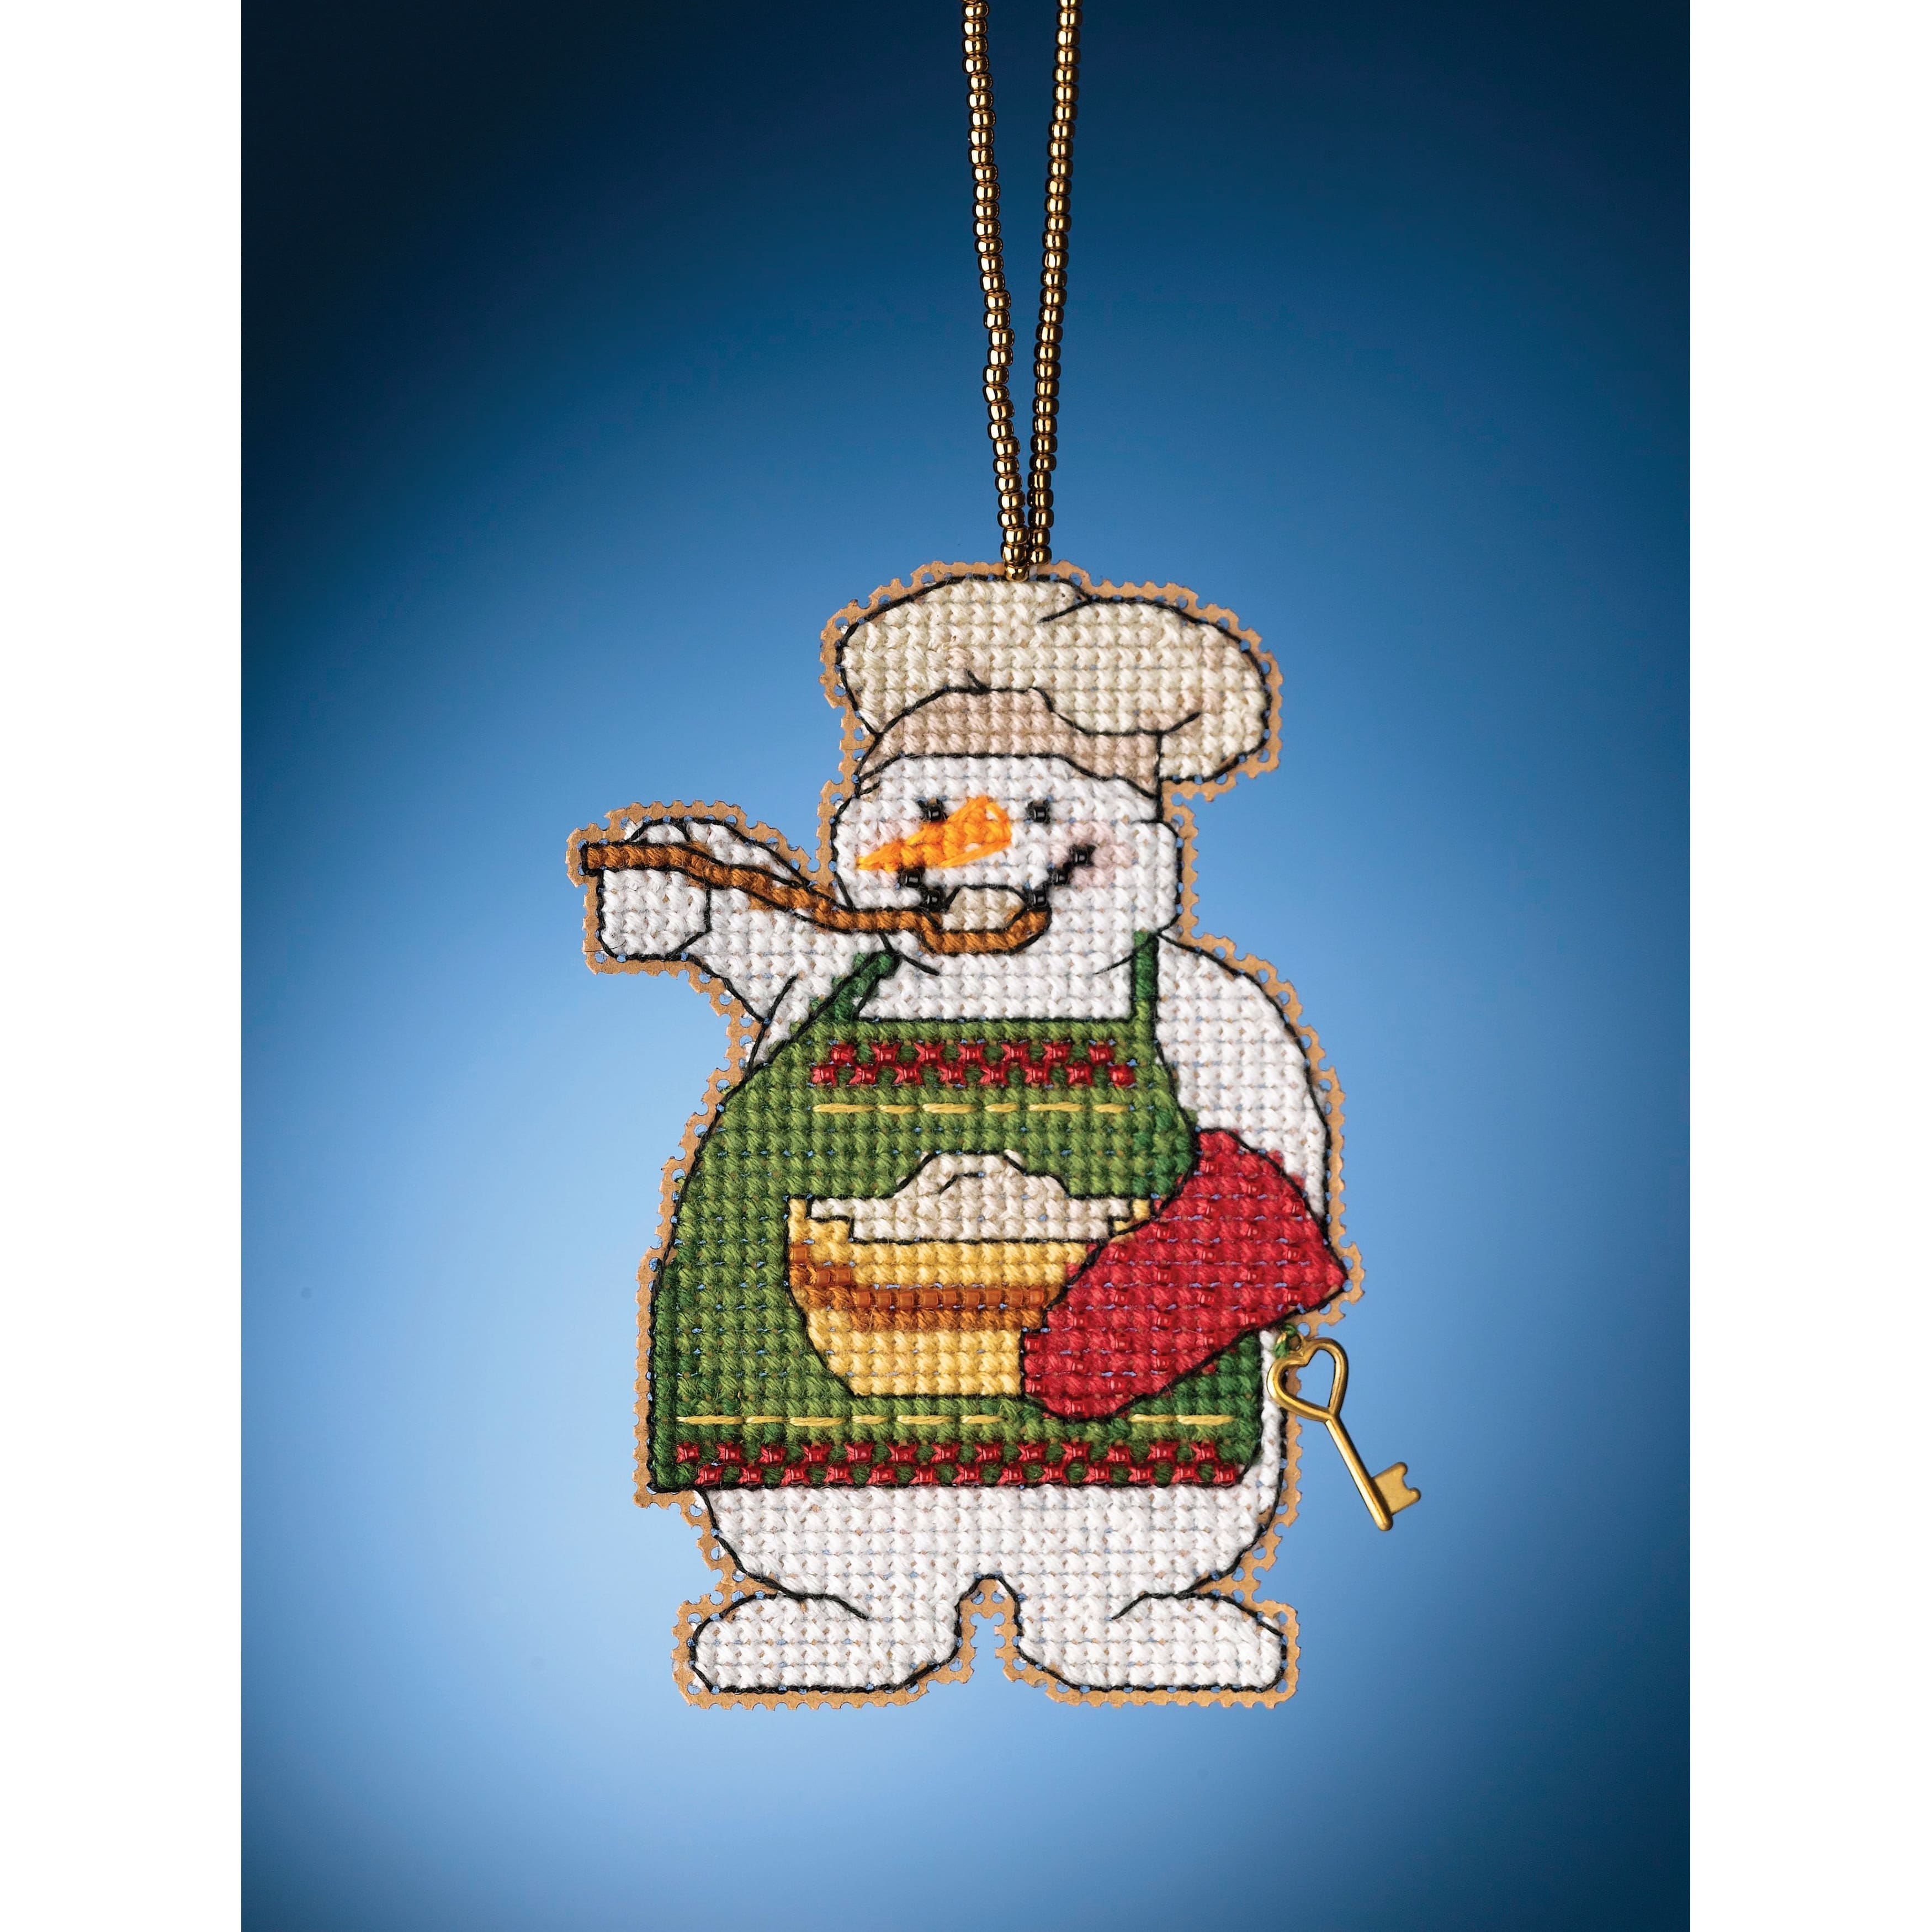 Mill Hill Counted Cross Stitch Ornament Kit 2.5X3.5-Giving Snowman (14  Count)